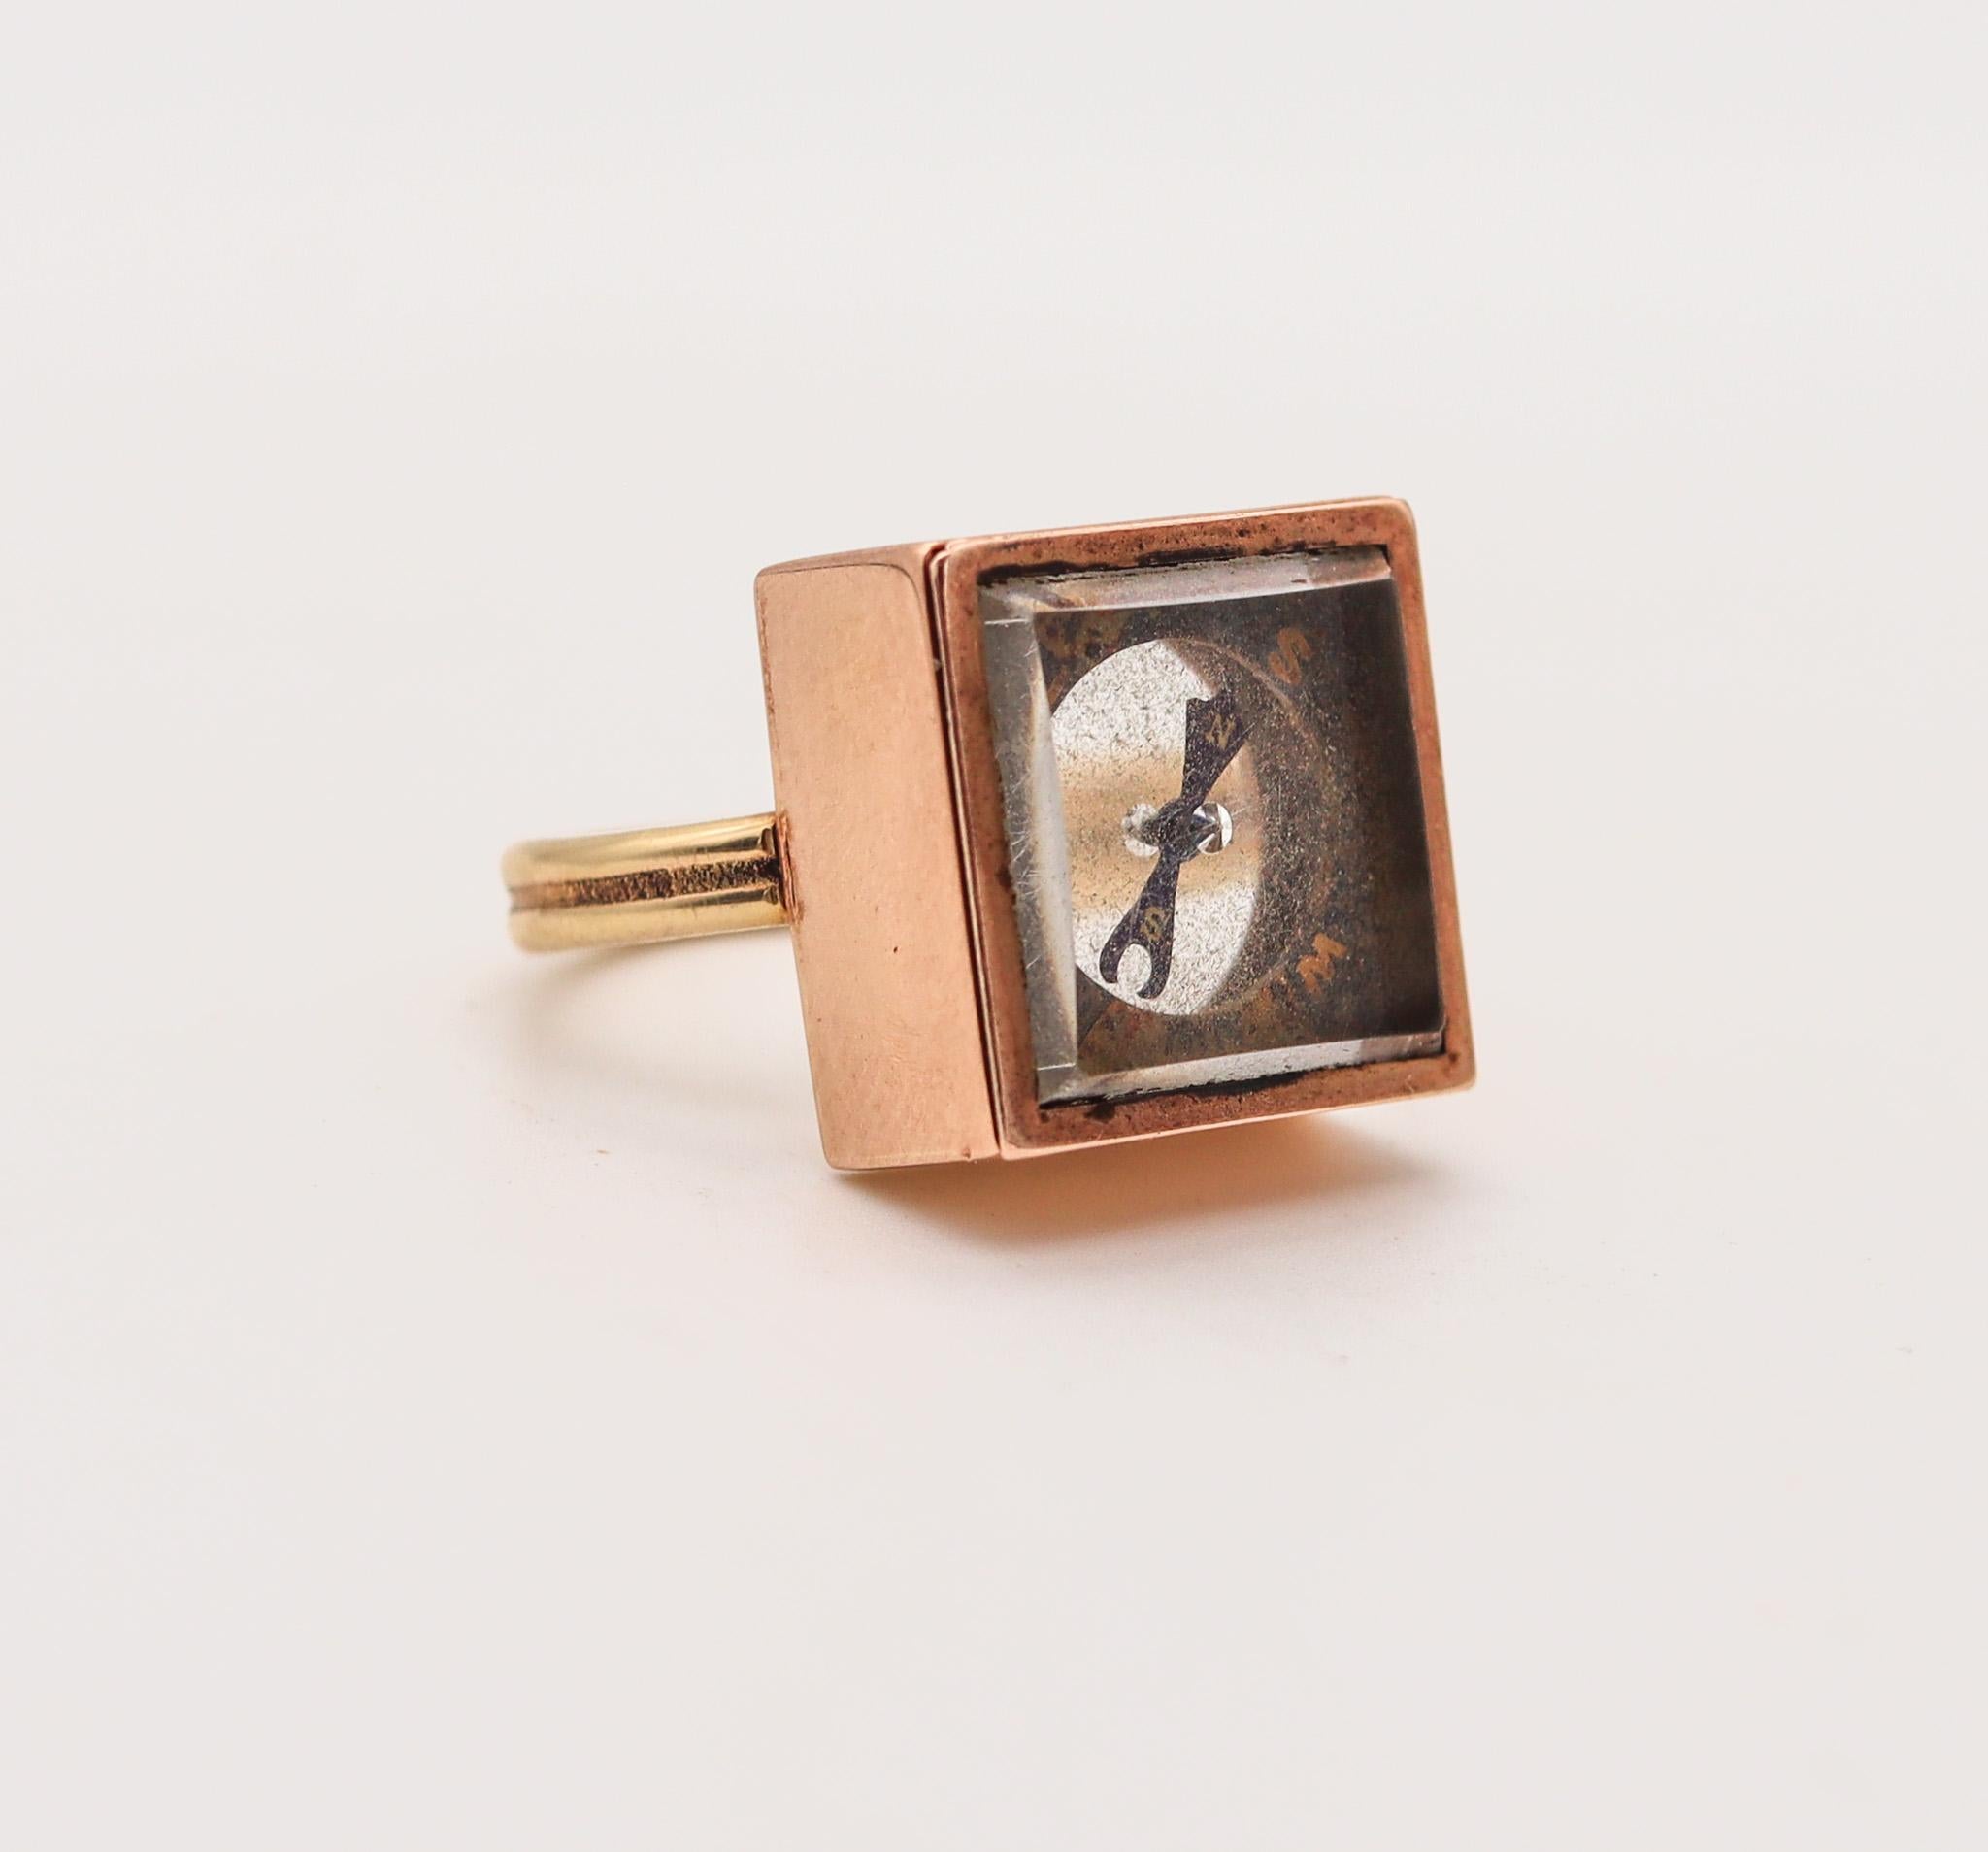 Antique ring with a mechanical functional compass.

Fabulous ring with a compass, created in America during the late Victorian era, back in the 1890. This extraordinary and very rare ring has been crafted in a squared shape in solid rose gold of 14